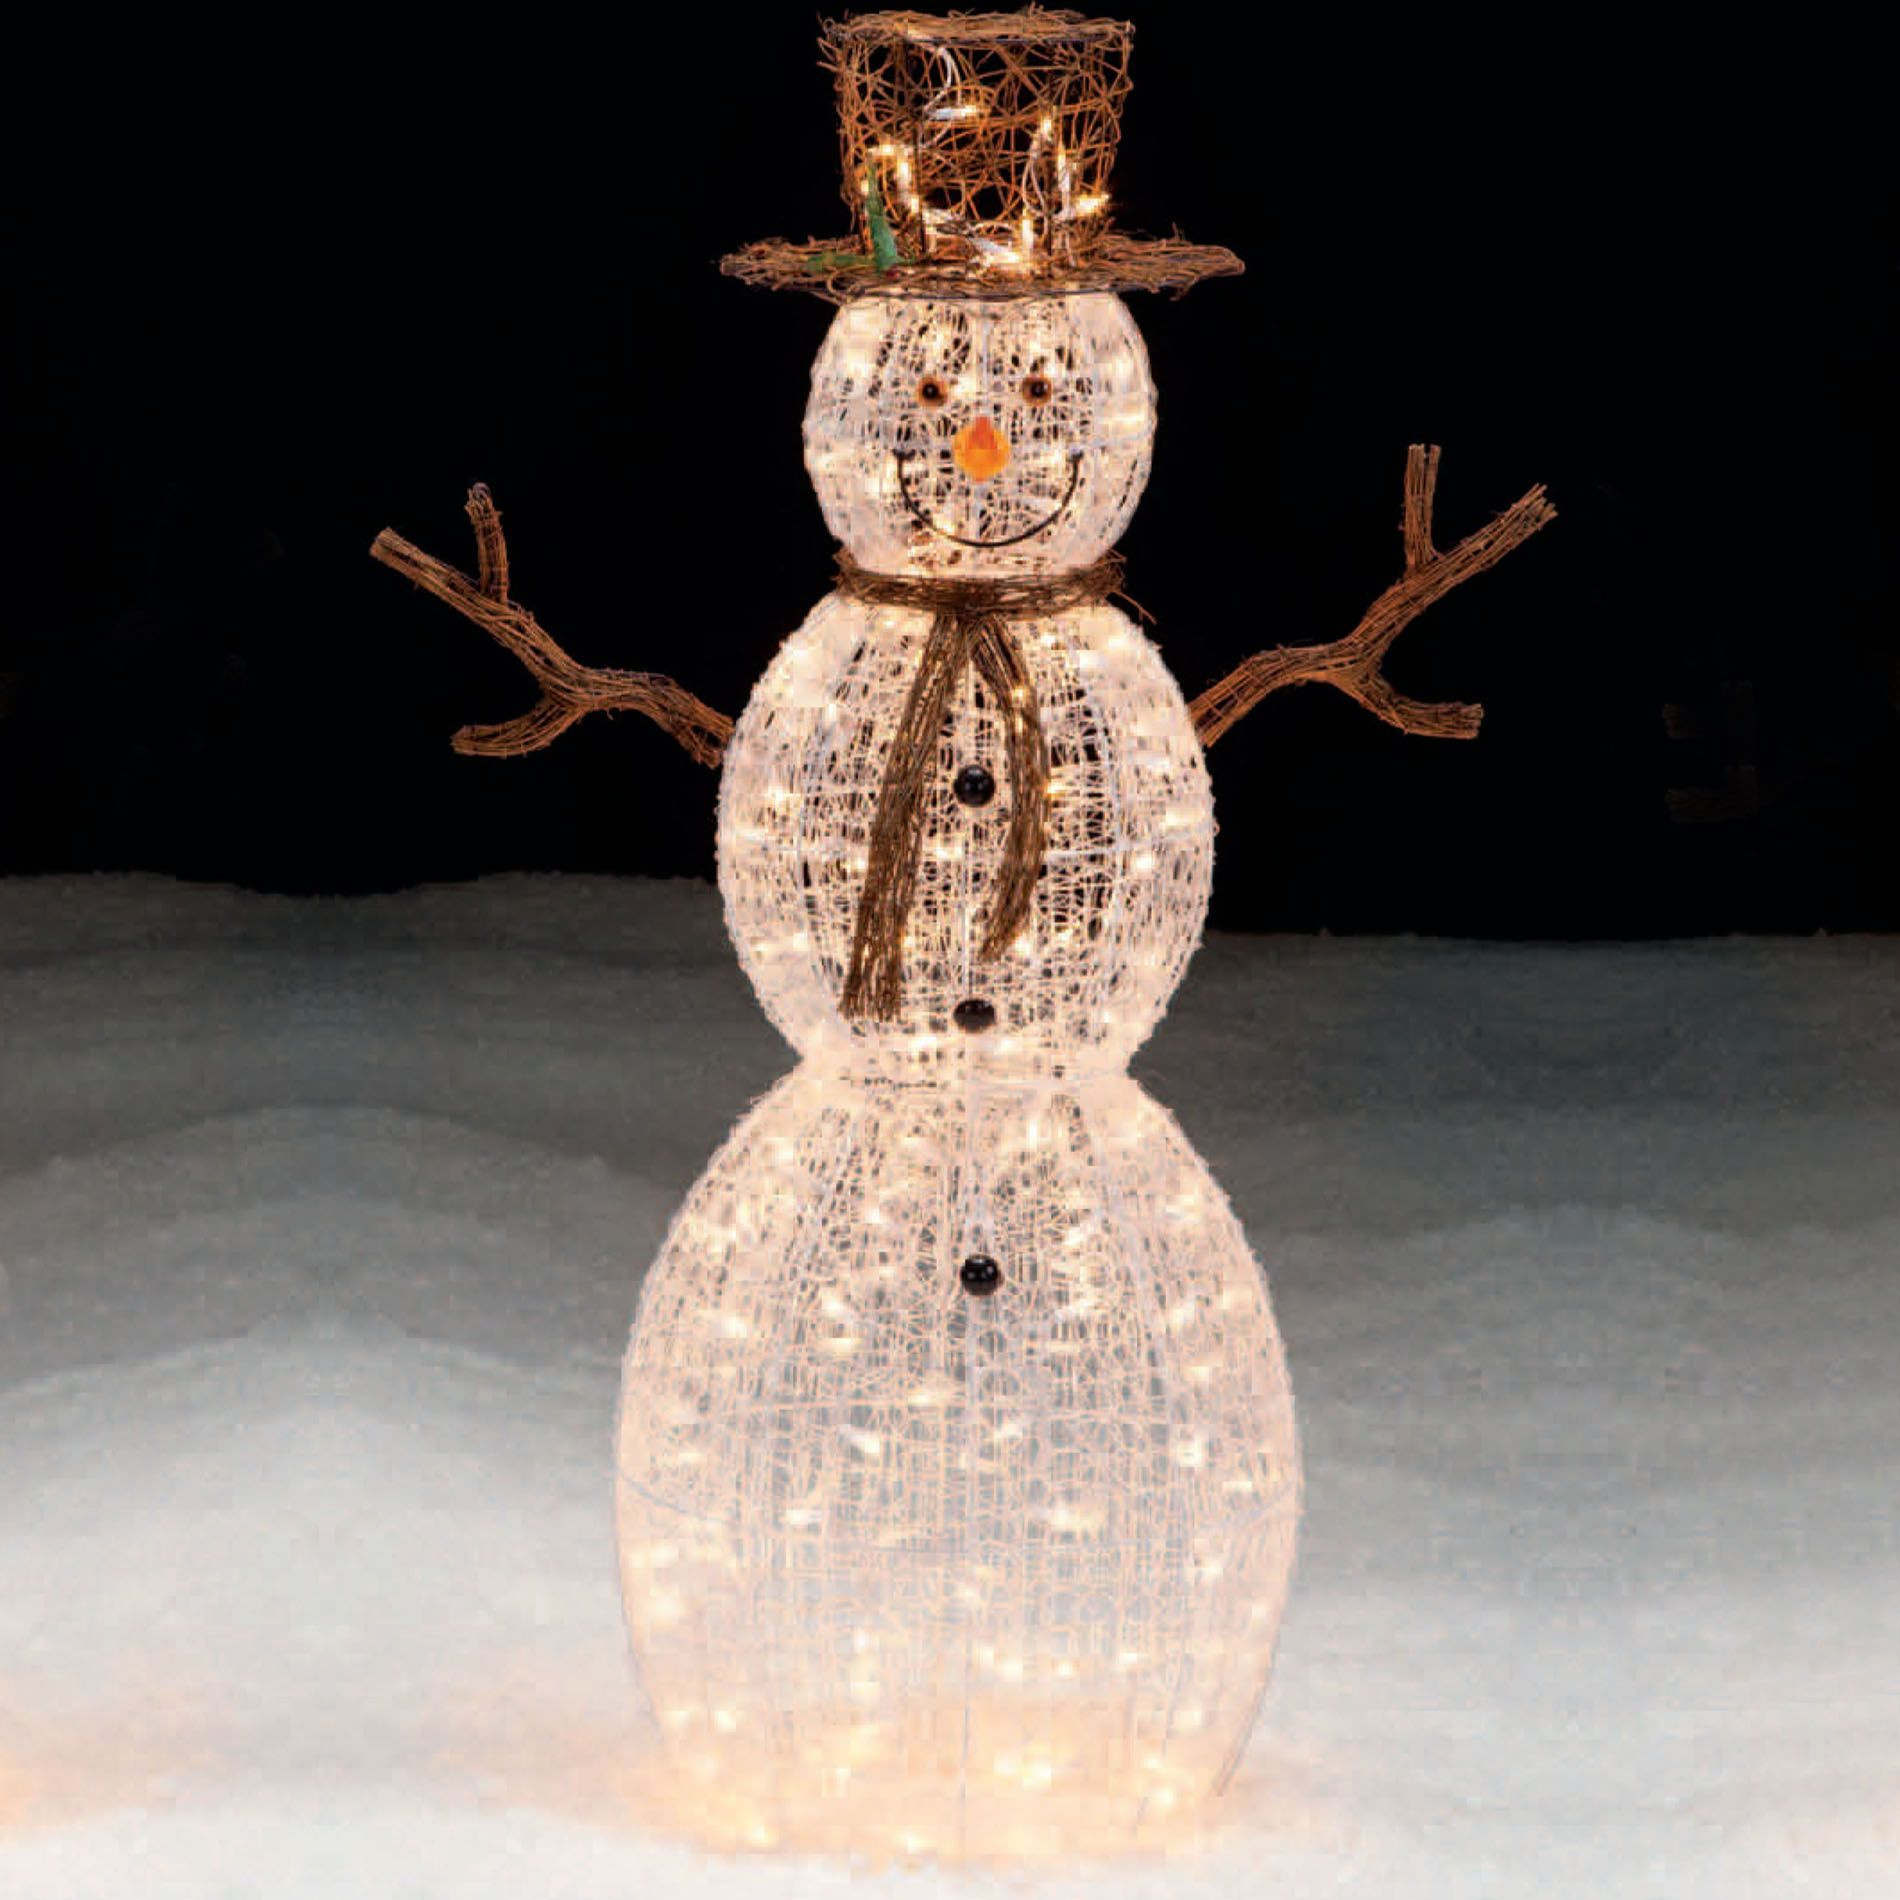 Lighted Outdoor Christmas Decorations
 Trim A Home 50” Lighted Snowman Outdoor Christmas